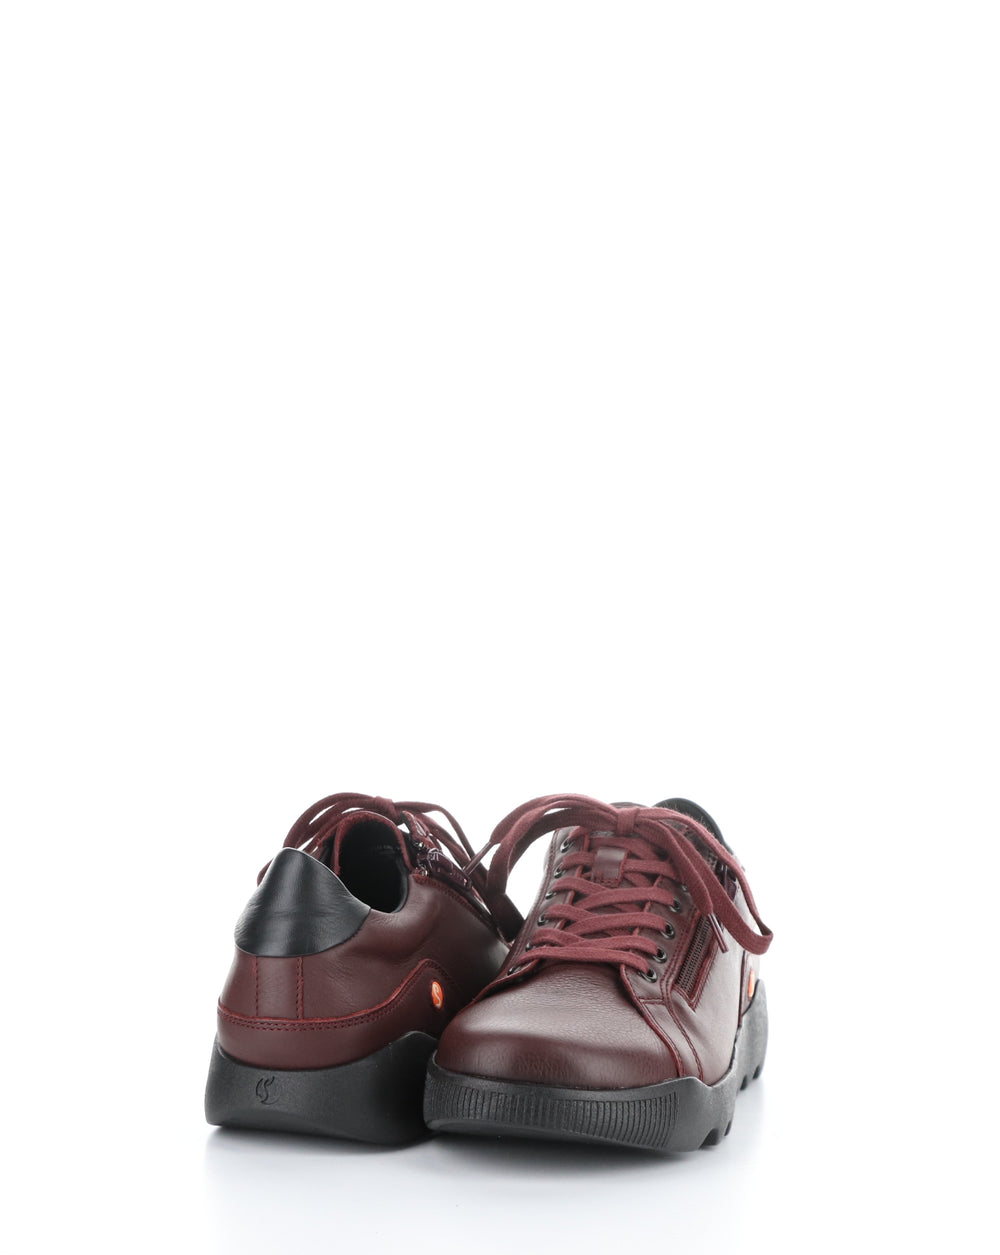 WHIZ719SOF 010 DK RED/BLACK Lace-up Shoes